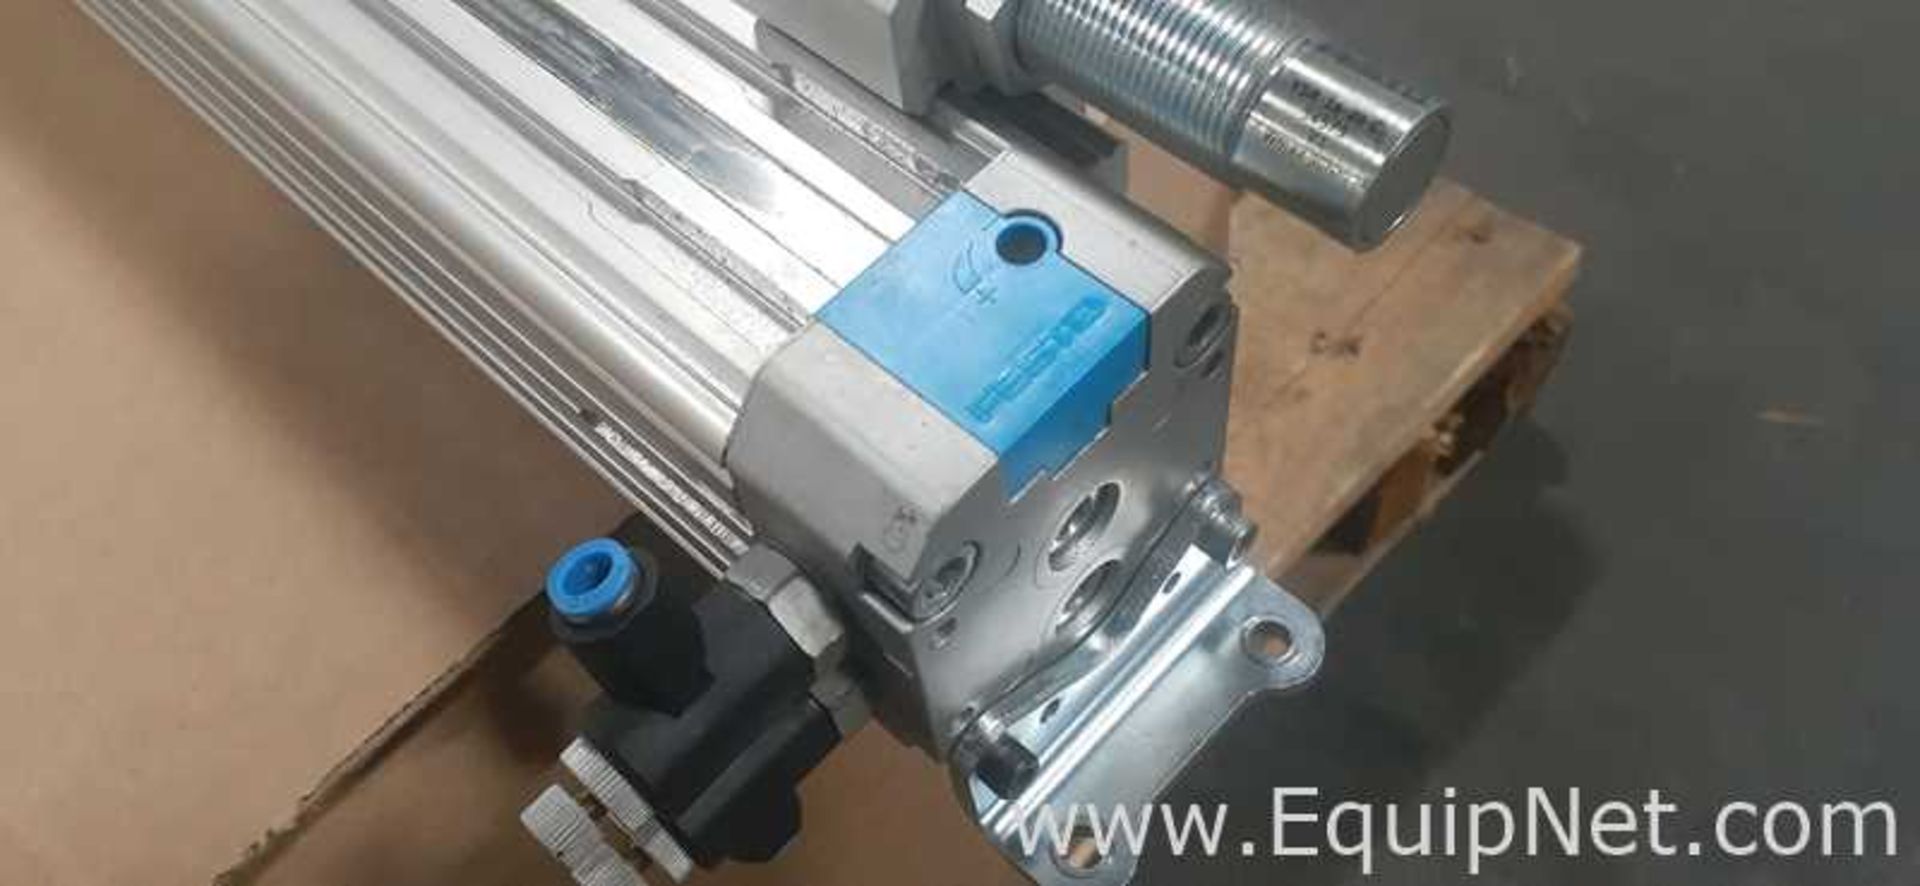 Festo 800 MM Linear Drive Rodless Pneumatic Cylinder - Image 4 of 5